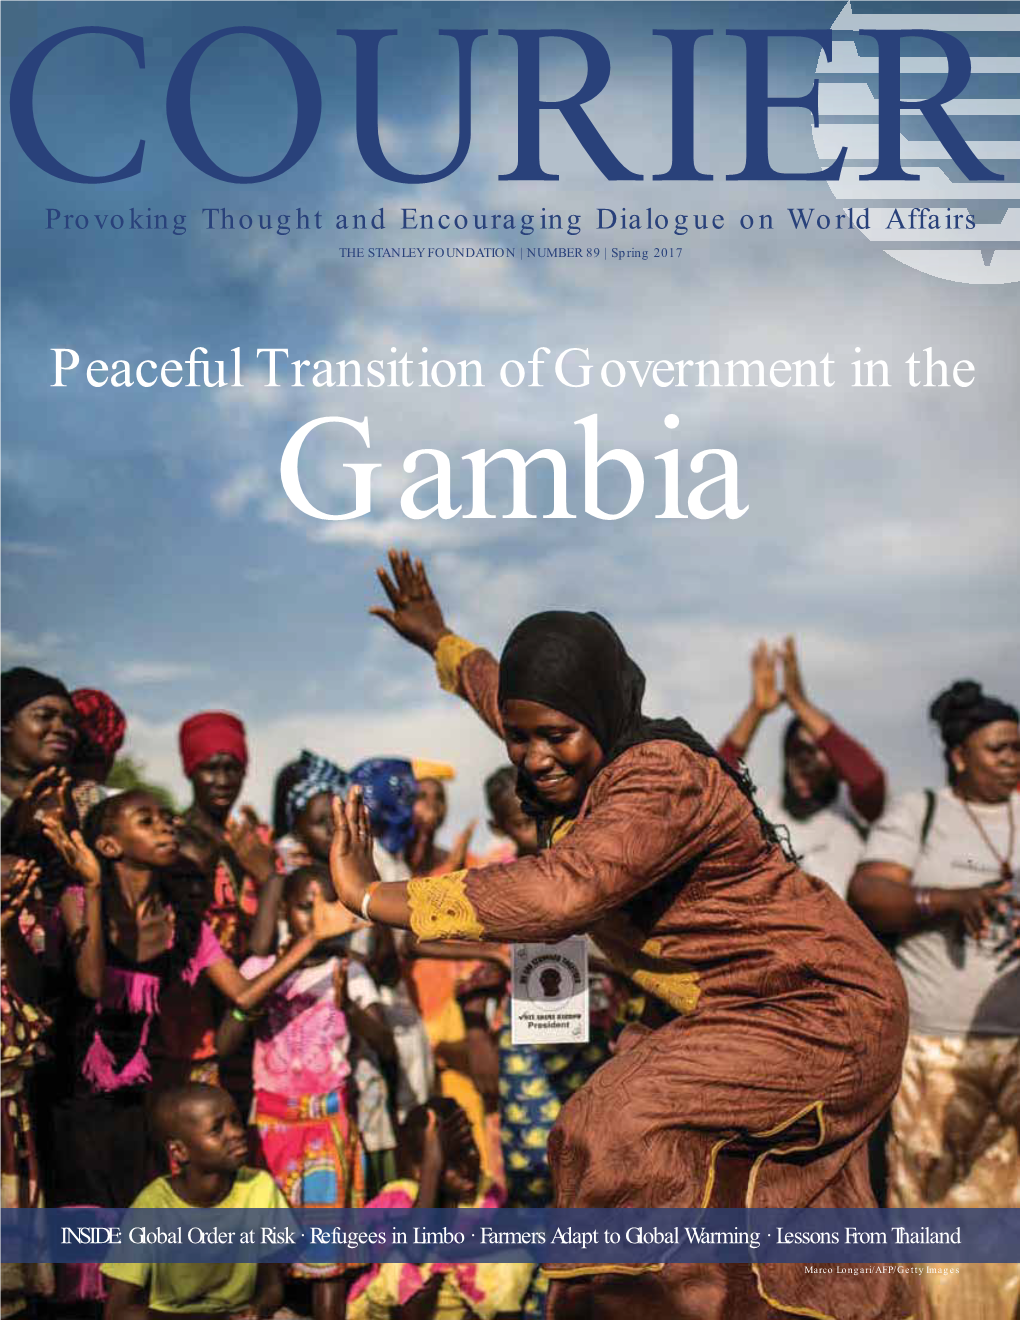 Peaceful Transition of Government in the Gambia